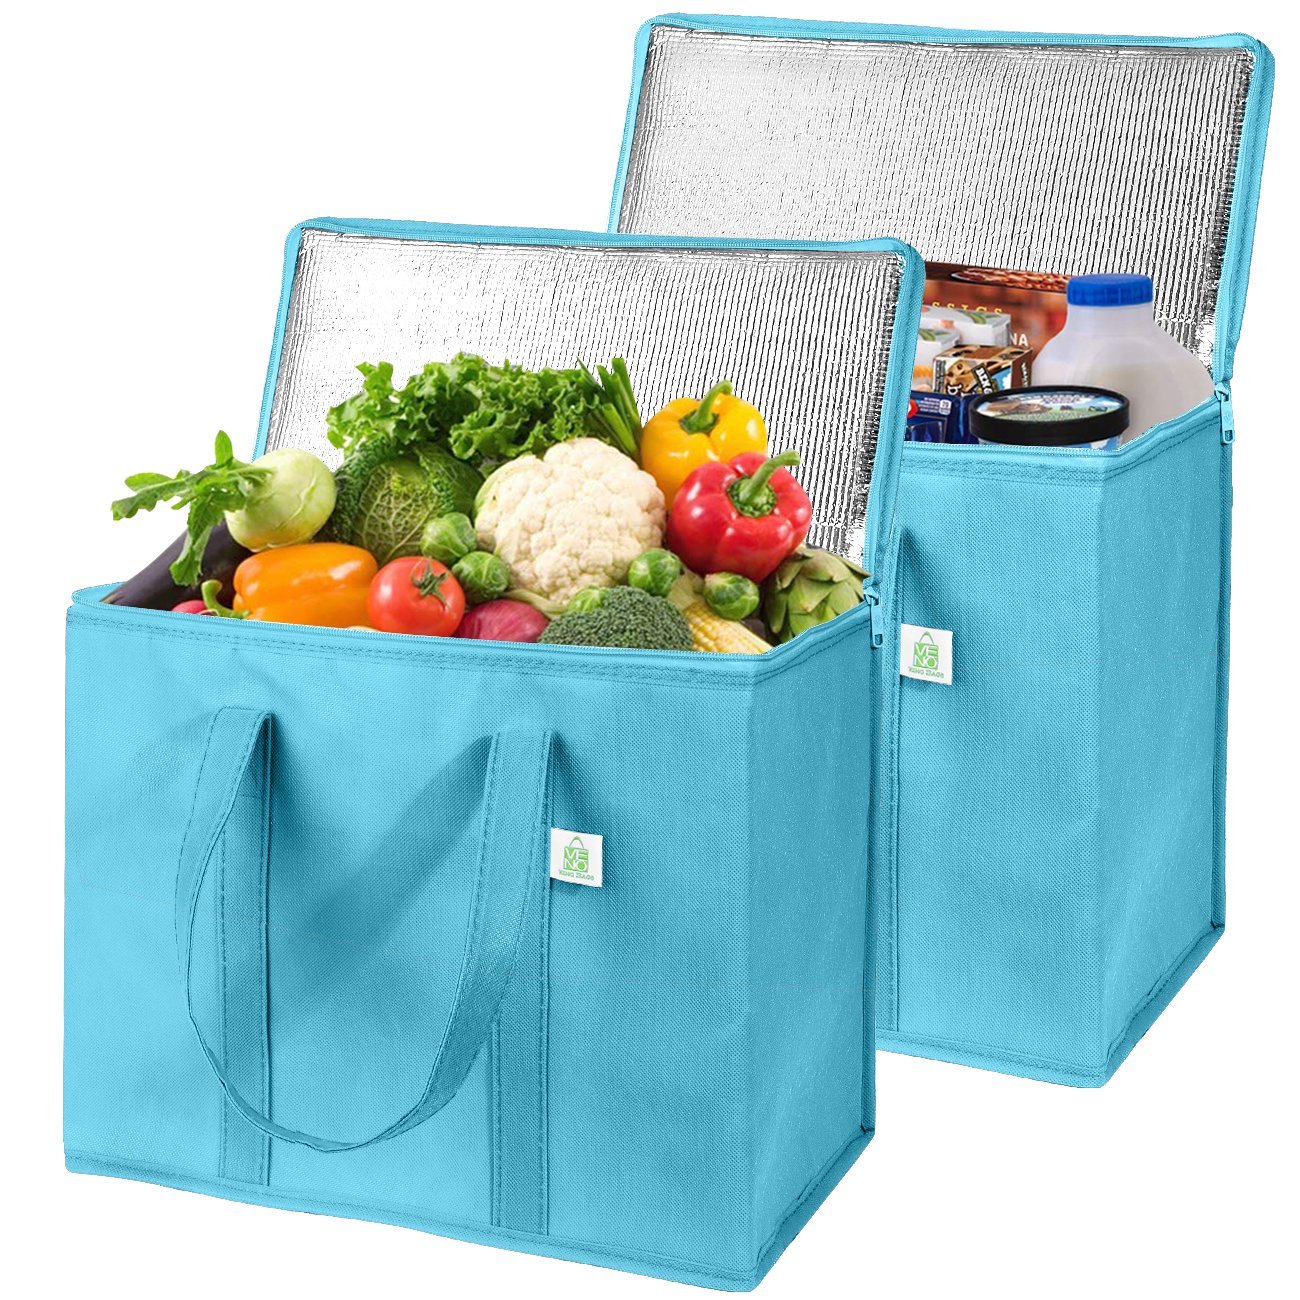 Insulated Reusable Grocery Bag, Durable, Heavy Duty and Extra Large Size - Cyan - image 1 of 8